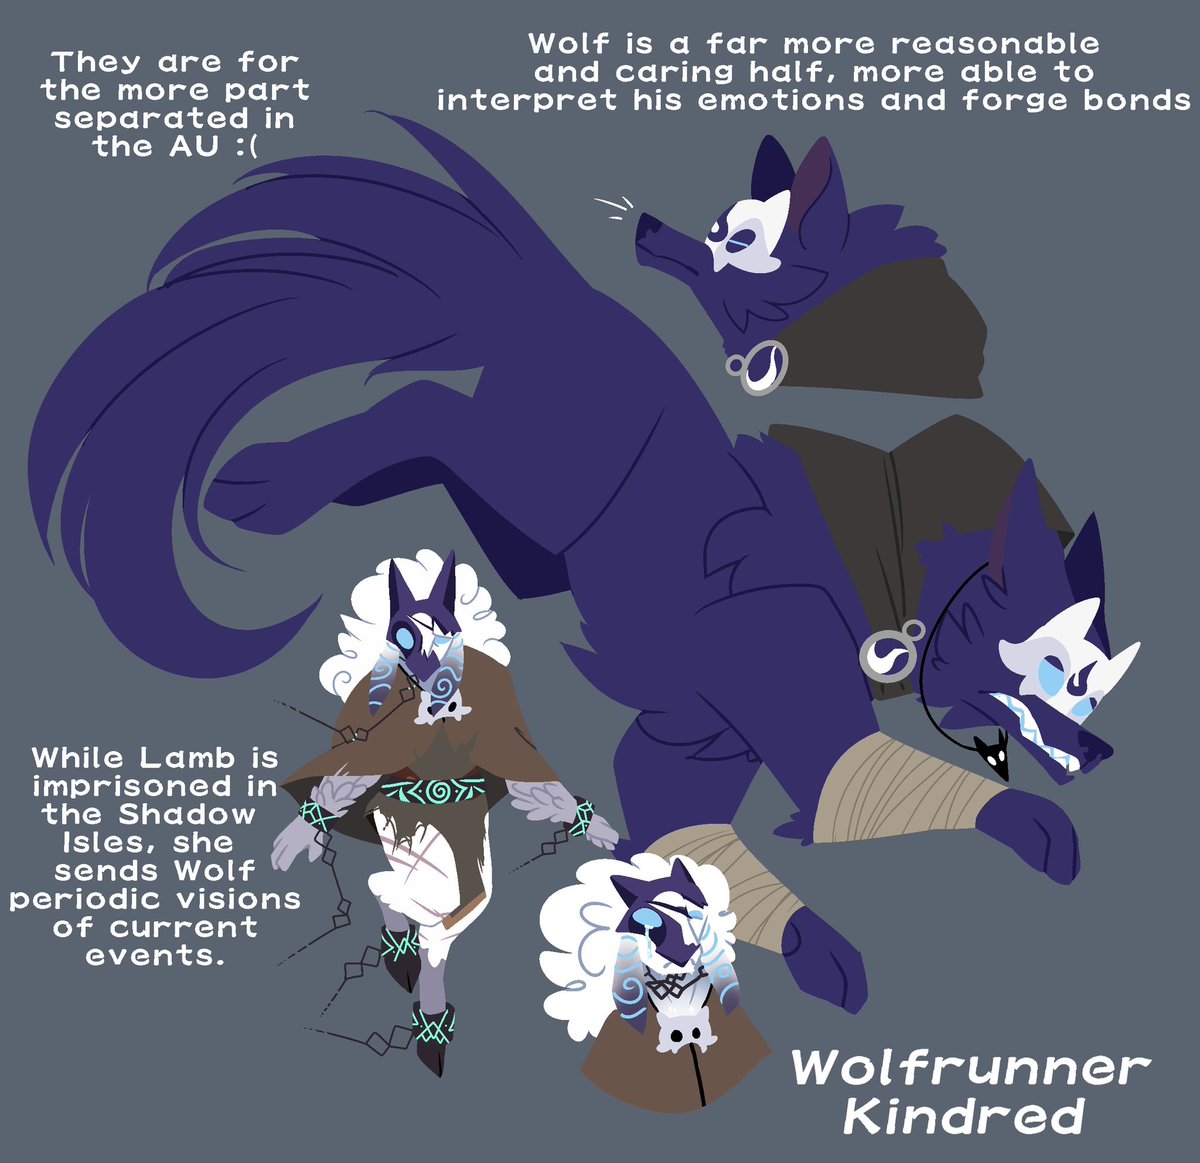 reboot Wolfrunner Lamb and Wof’s reference sheet! they now wear clothes<3
-
I shall redo my pinned tweet for the au now